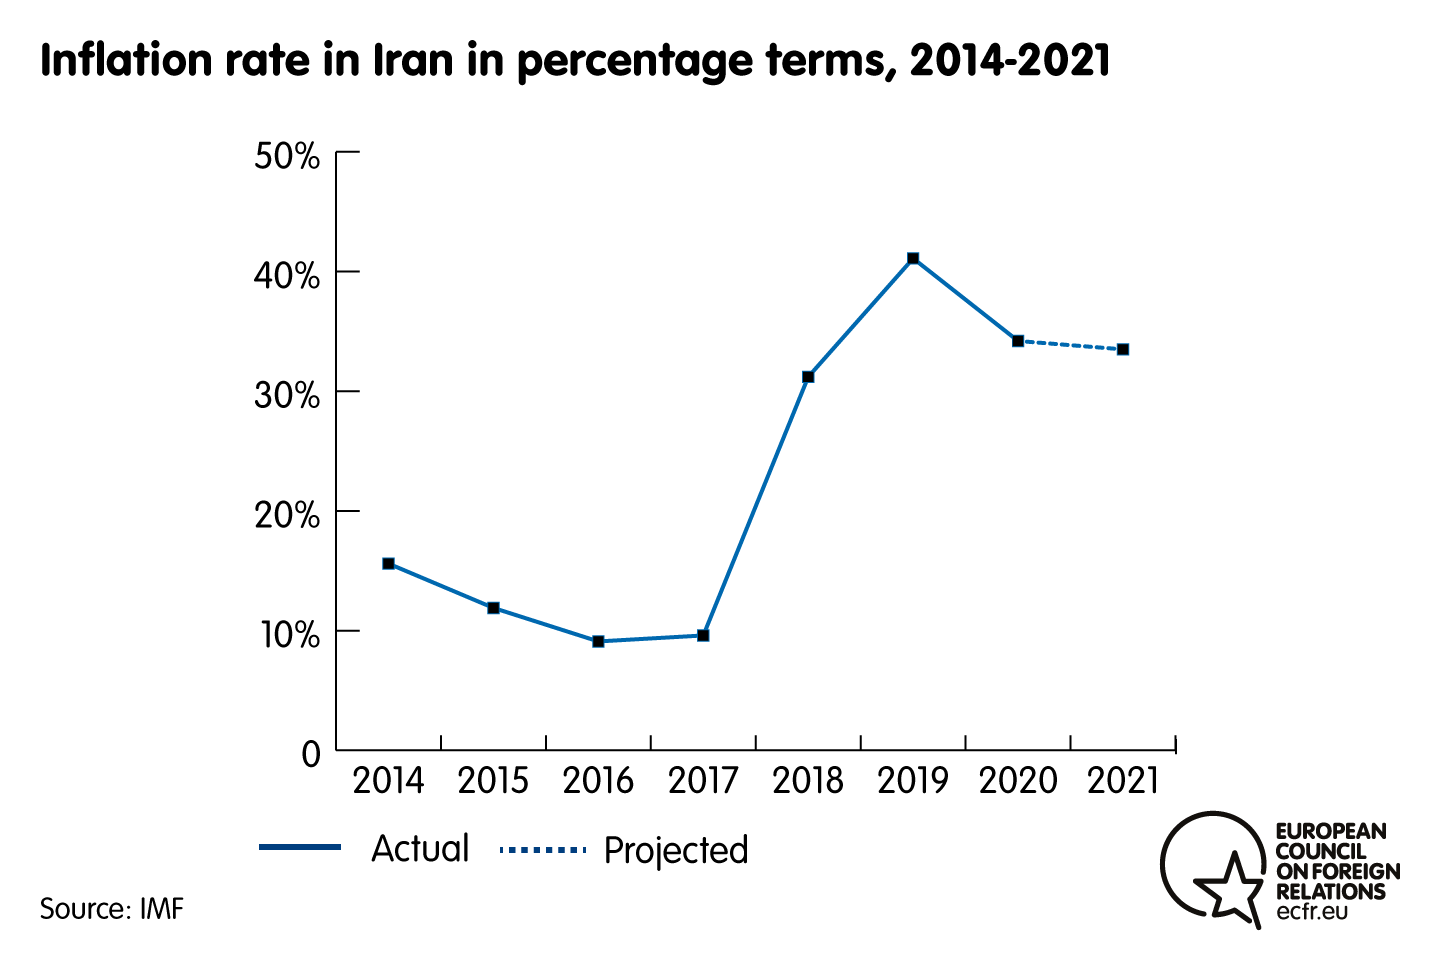 Chart of the inflation rate in Iran in percentage terms, 2014-2021